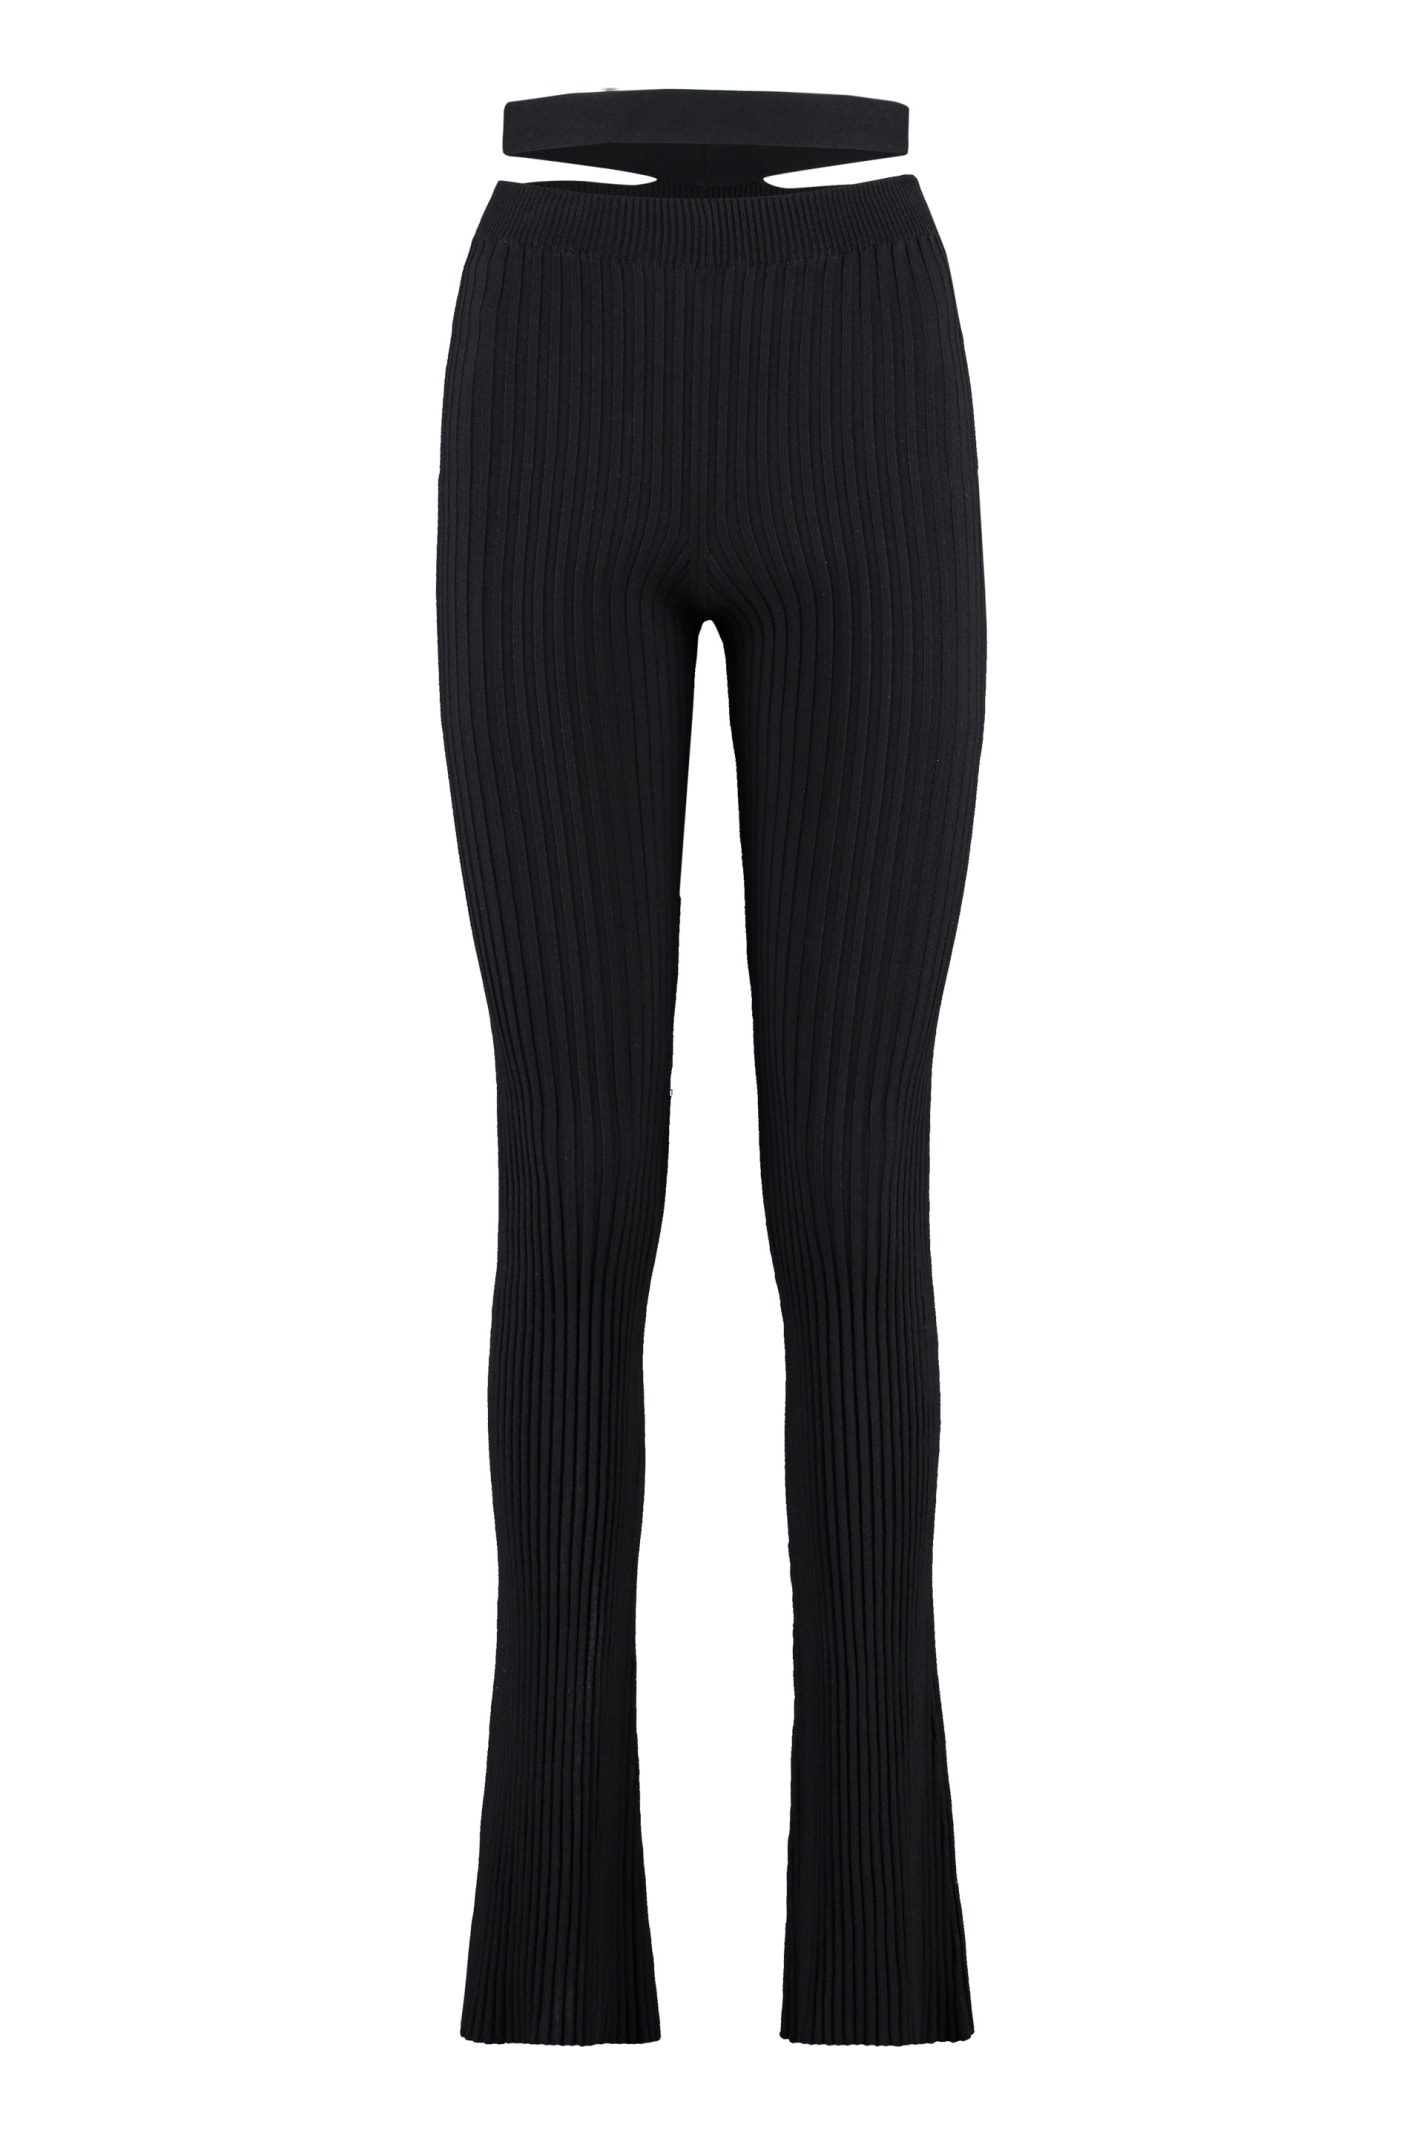 ANDREADAMO Ribs Knitted Trousers